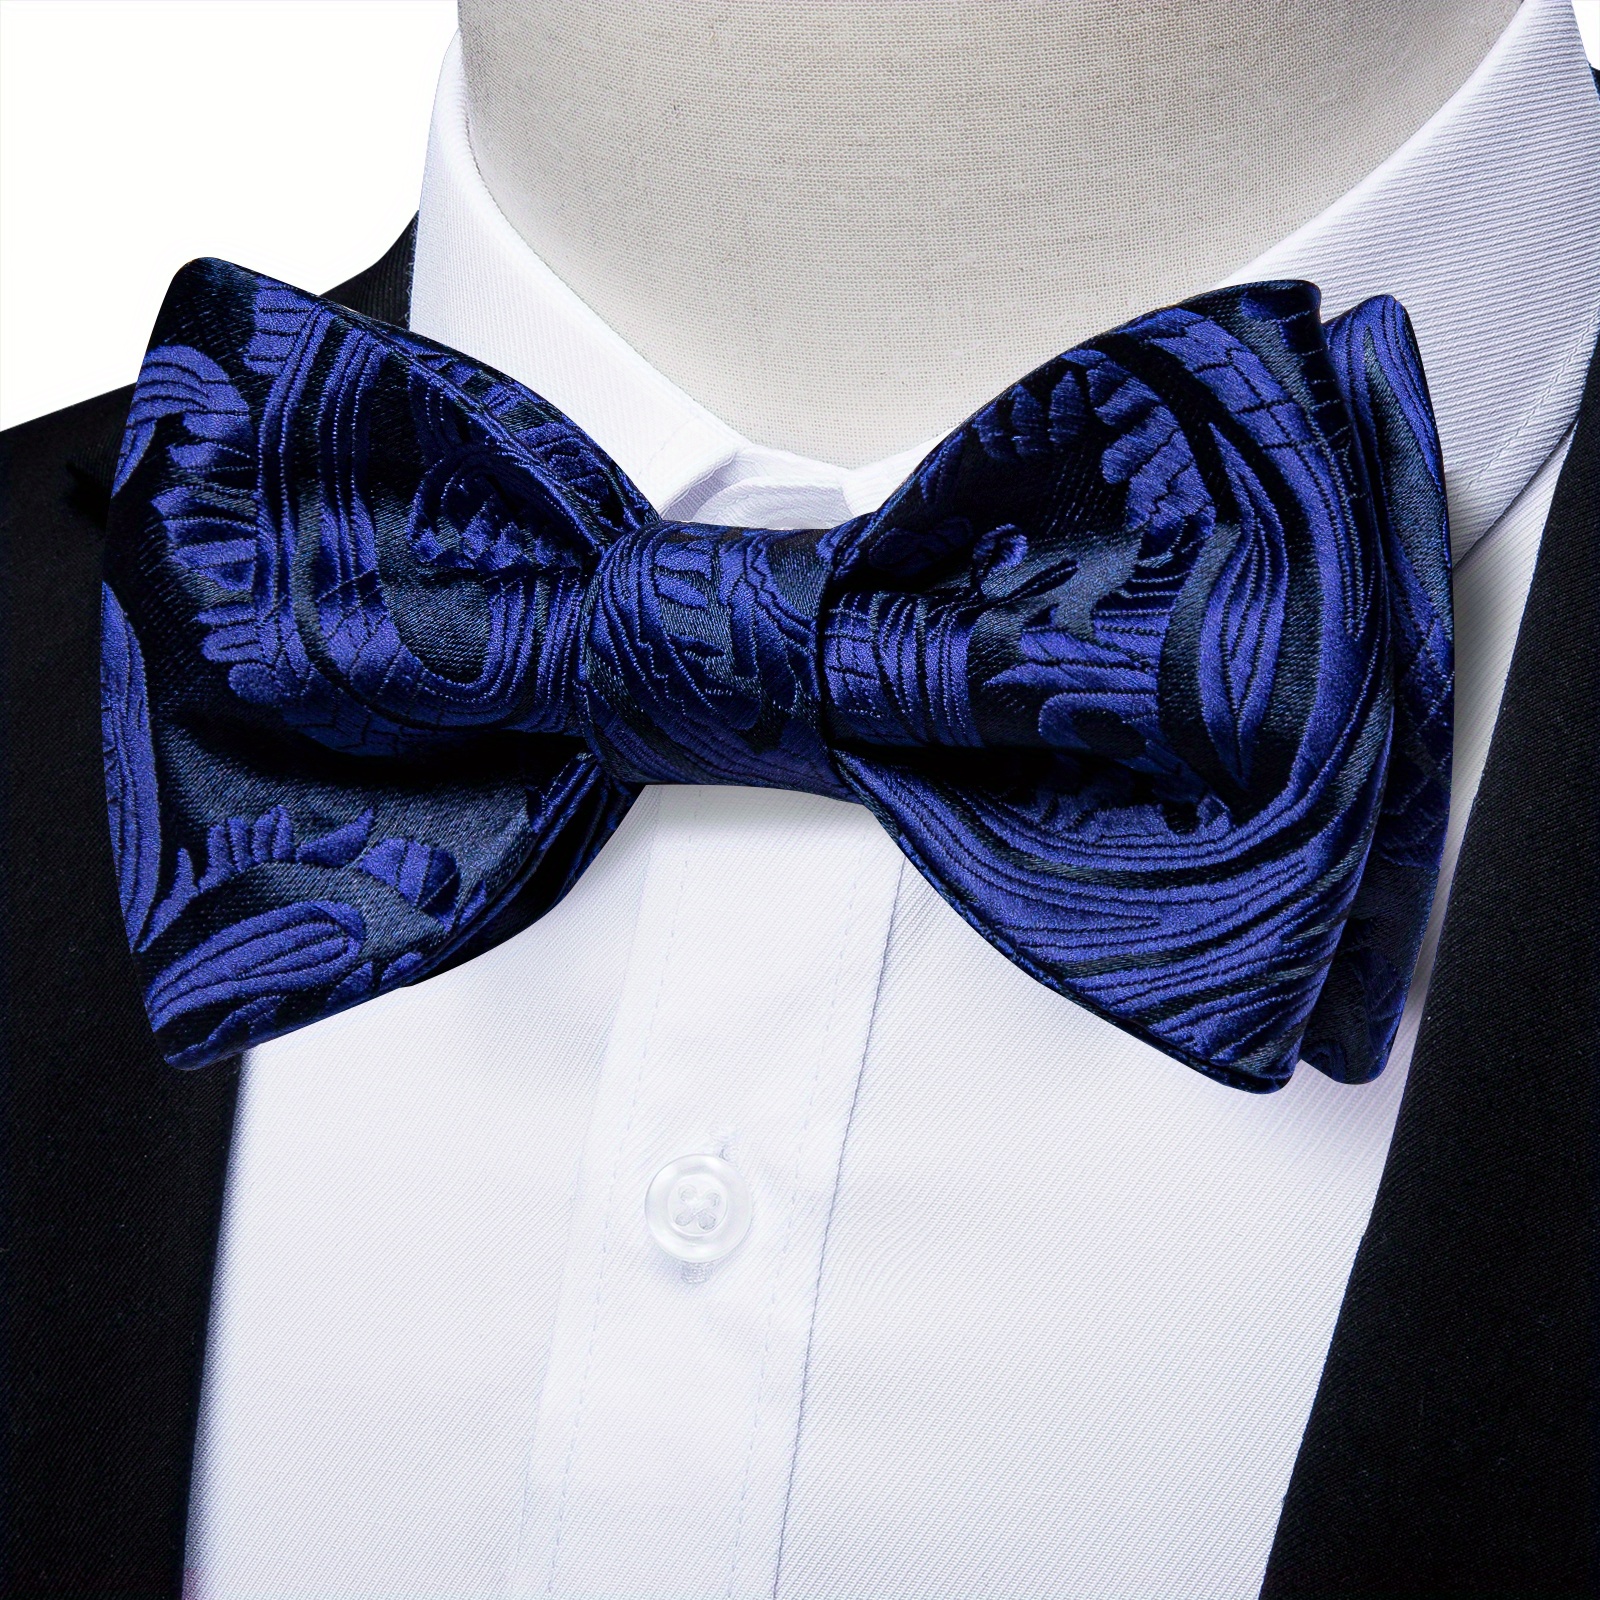 HISDERN Bow Ties for Men 3pcs Mixed Self-Tie Bow Tie and Pocket Square Set Classic Formal Tuxedo Wedding & Party Bowtie